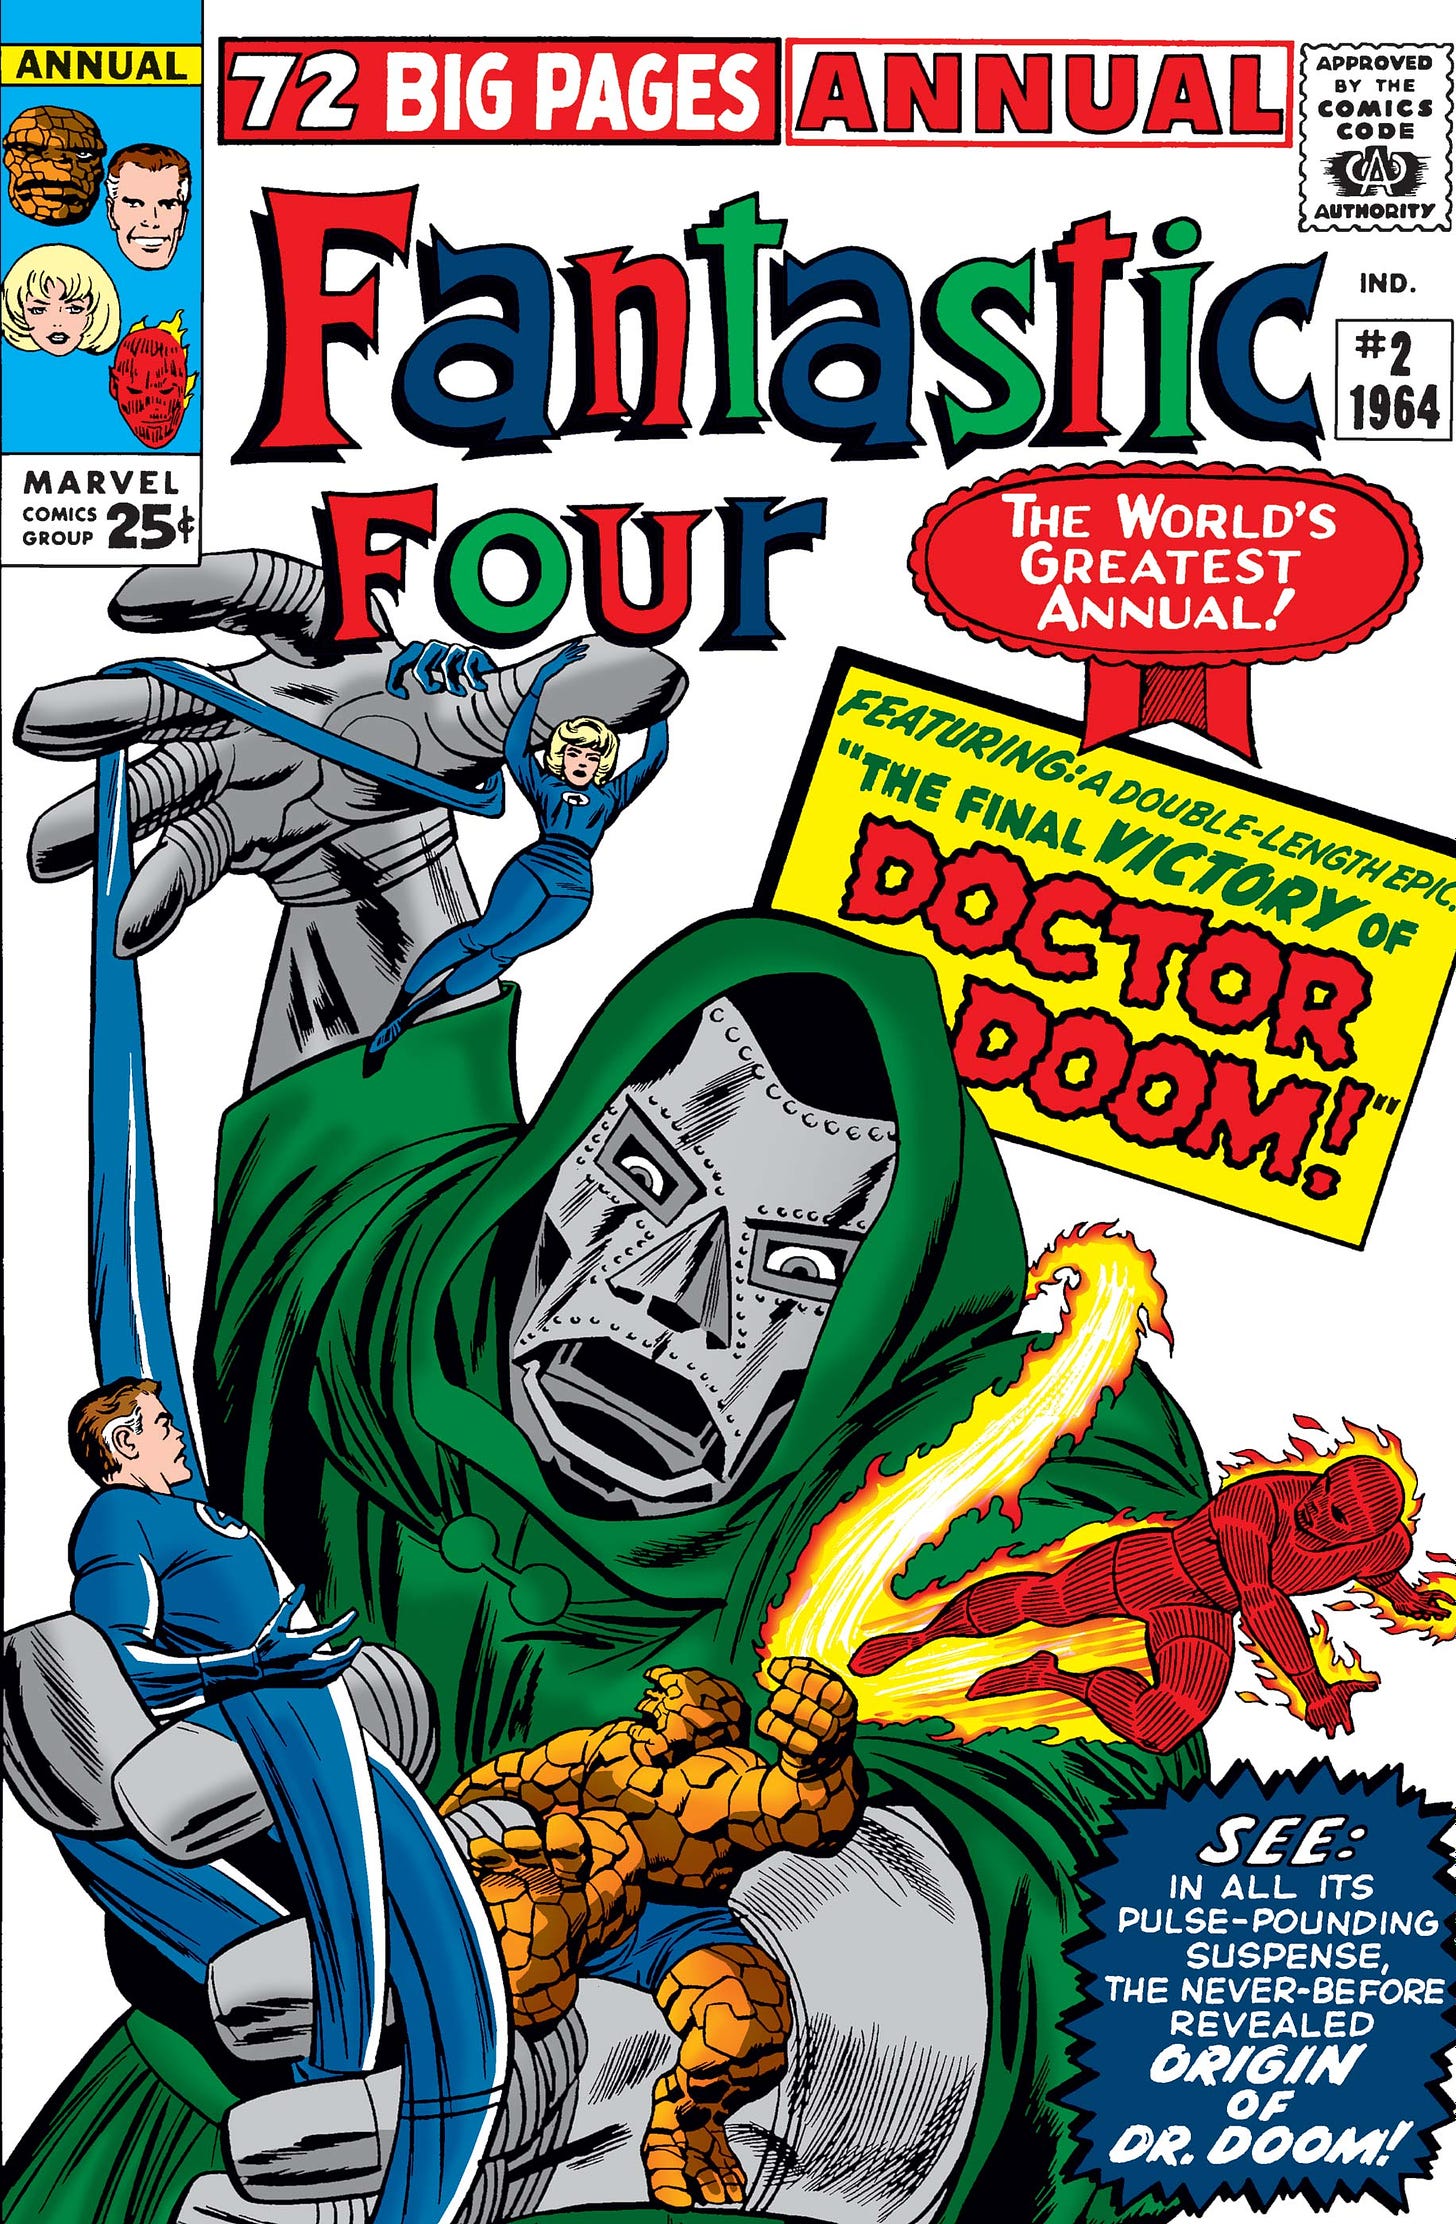 Fantastic Four Annual (1963) #2 | Comic Issues | Marvel